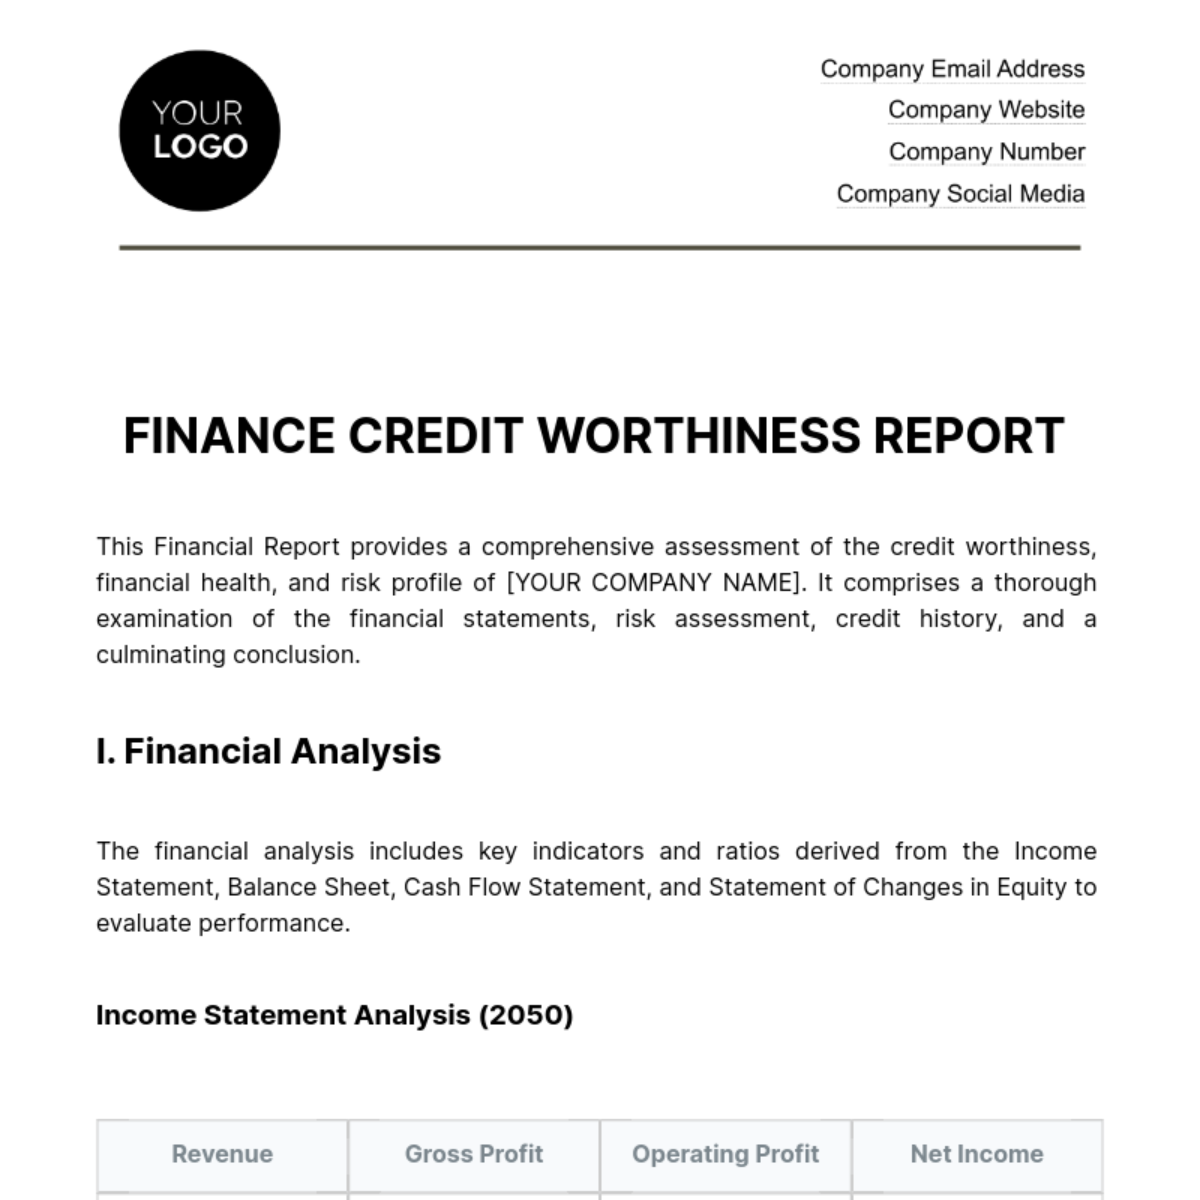 Free Finance Credit Worthiness Report Template